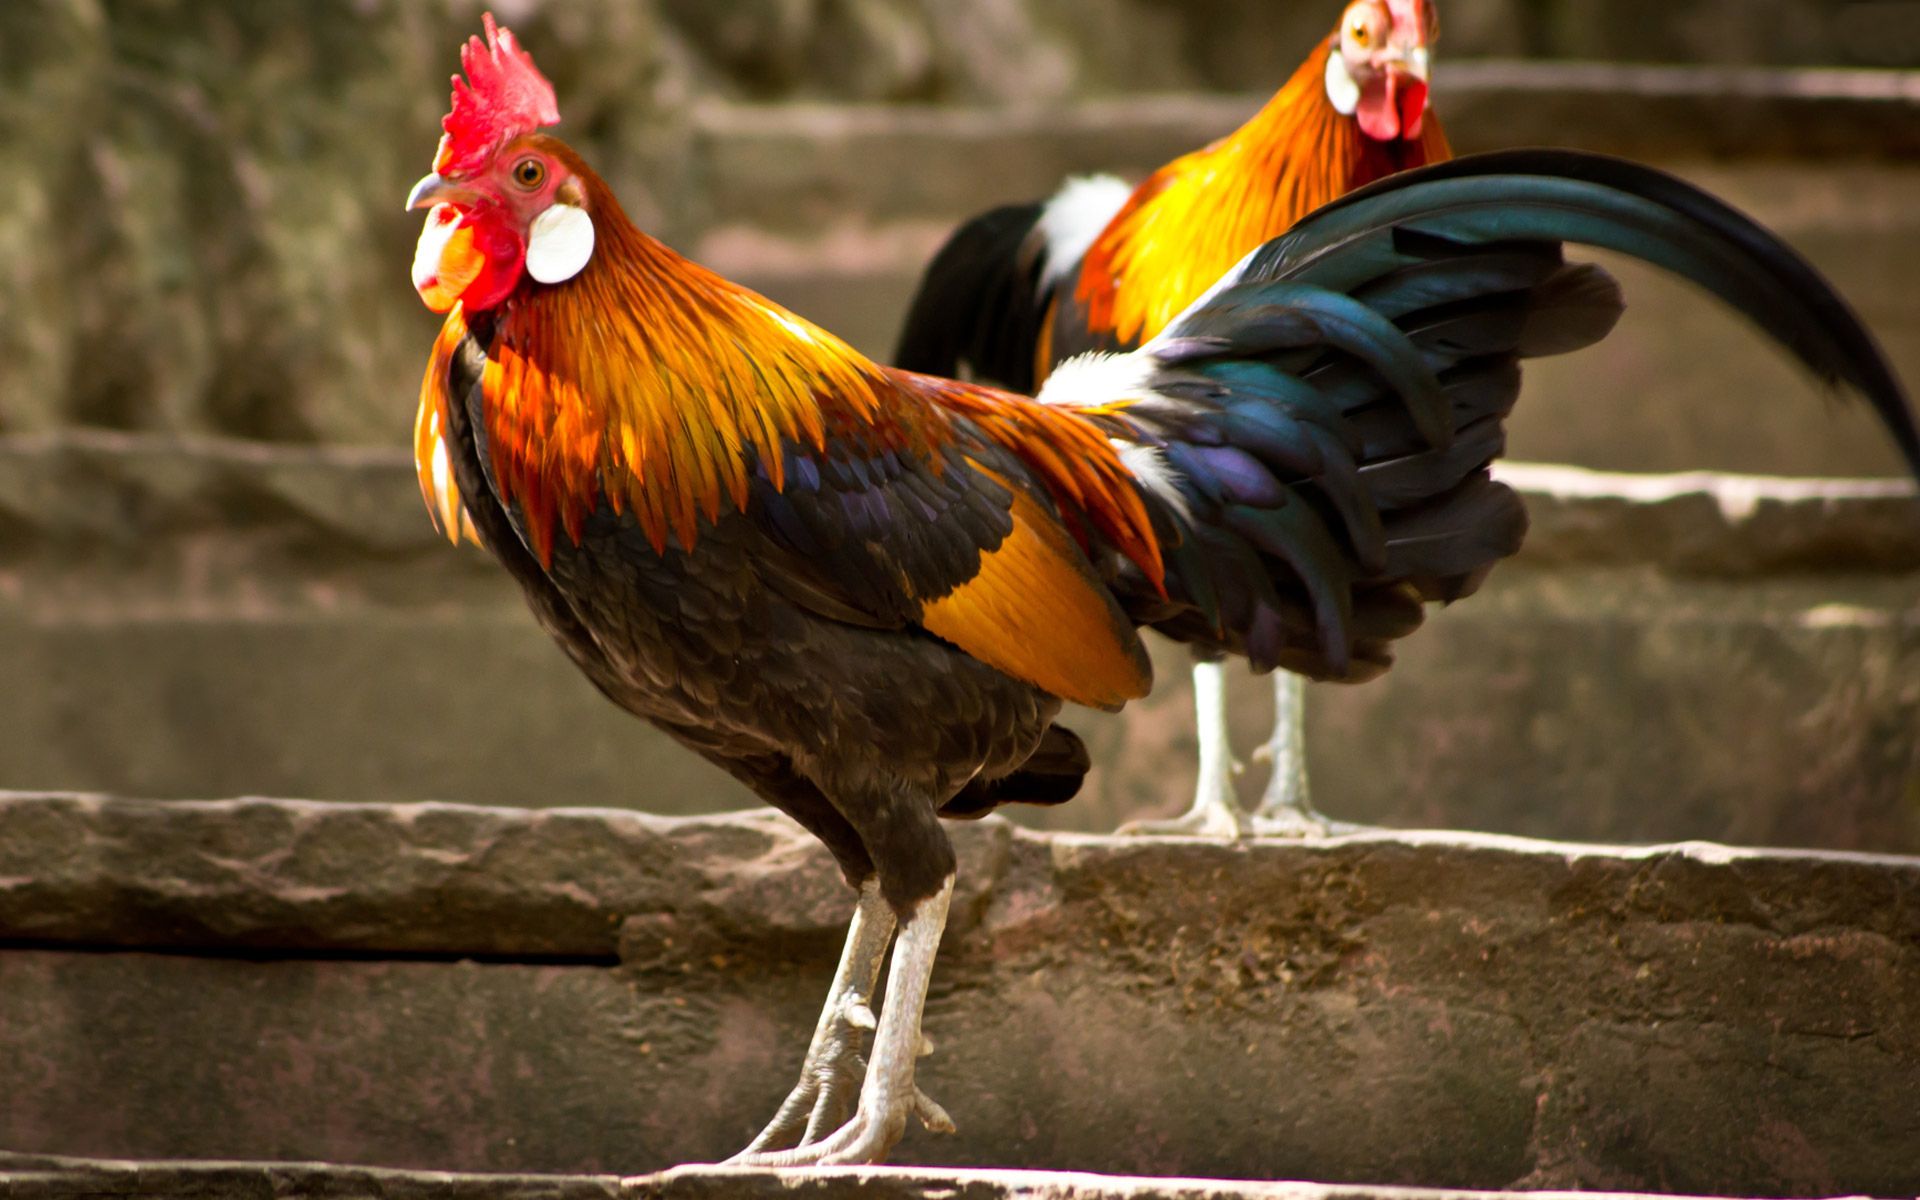 Two Roosters In The Rain Background Pictures Of Fighting Roosters  Background Image And Wallpaper for Free Download